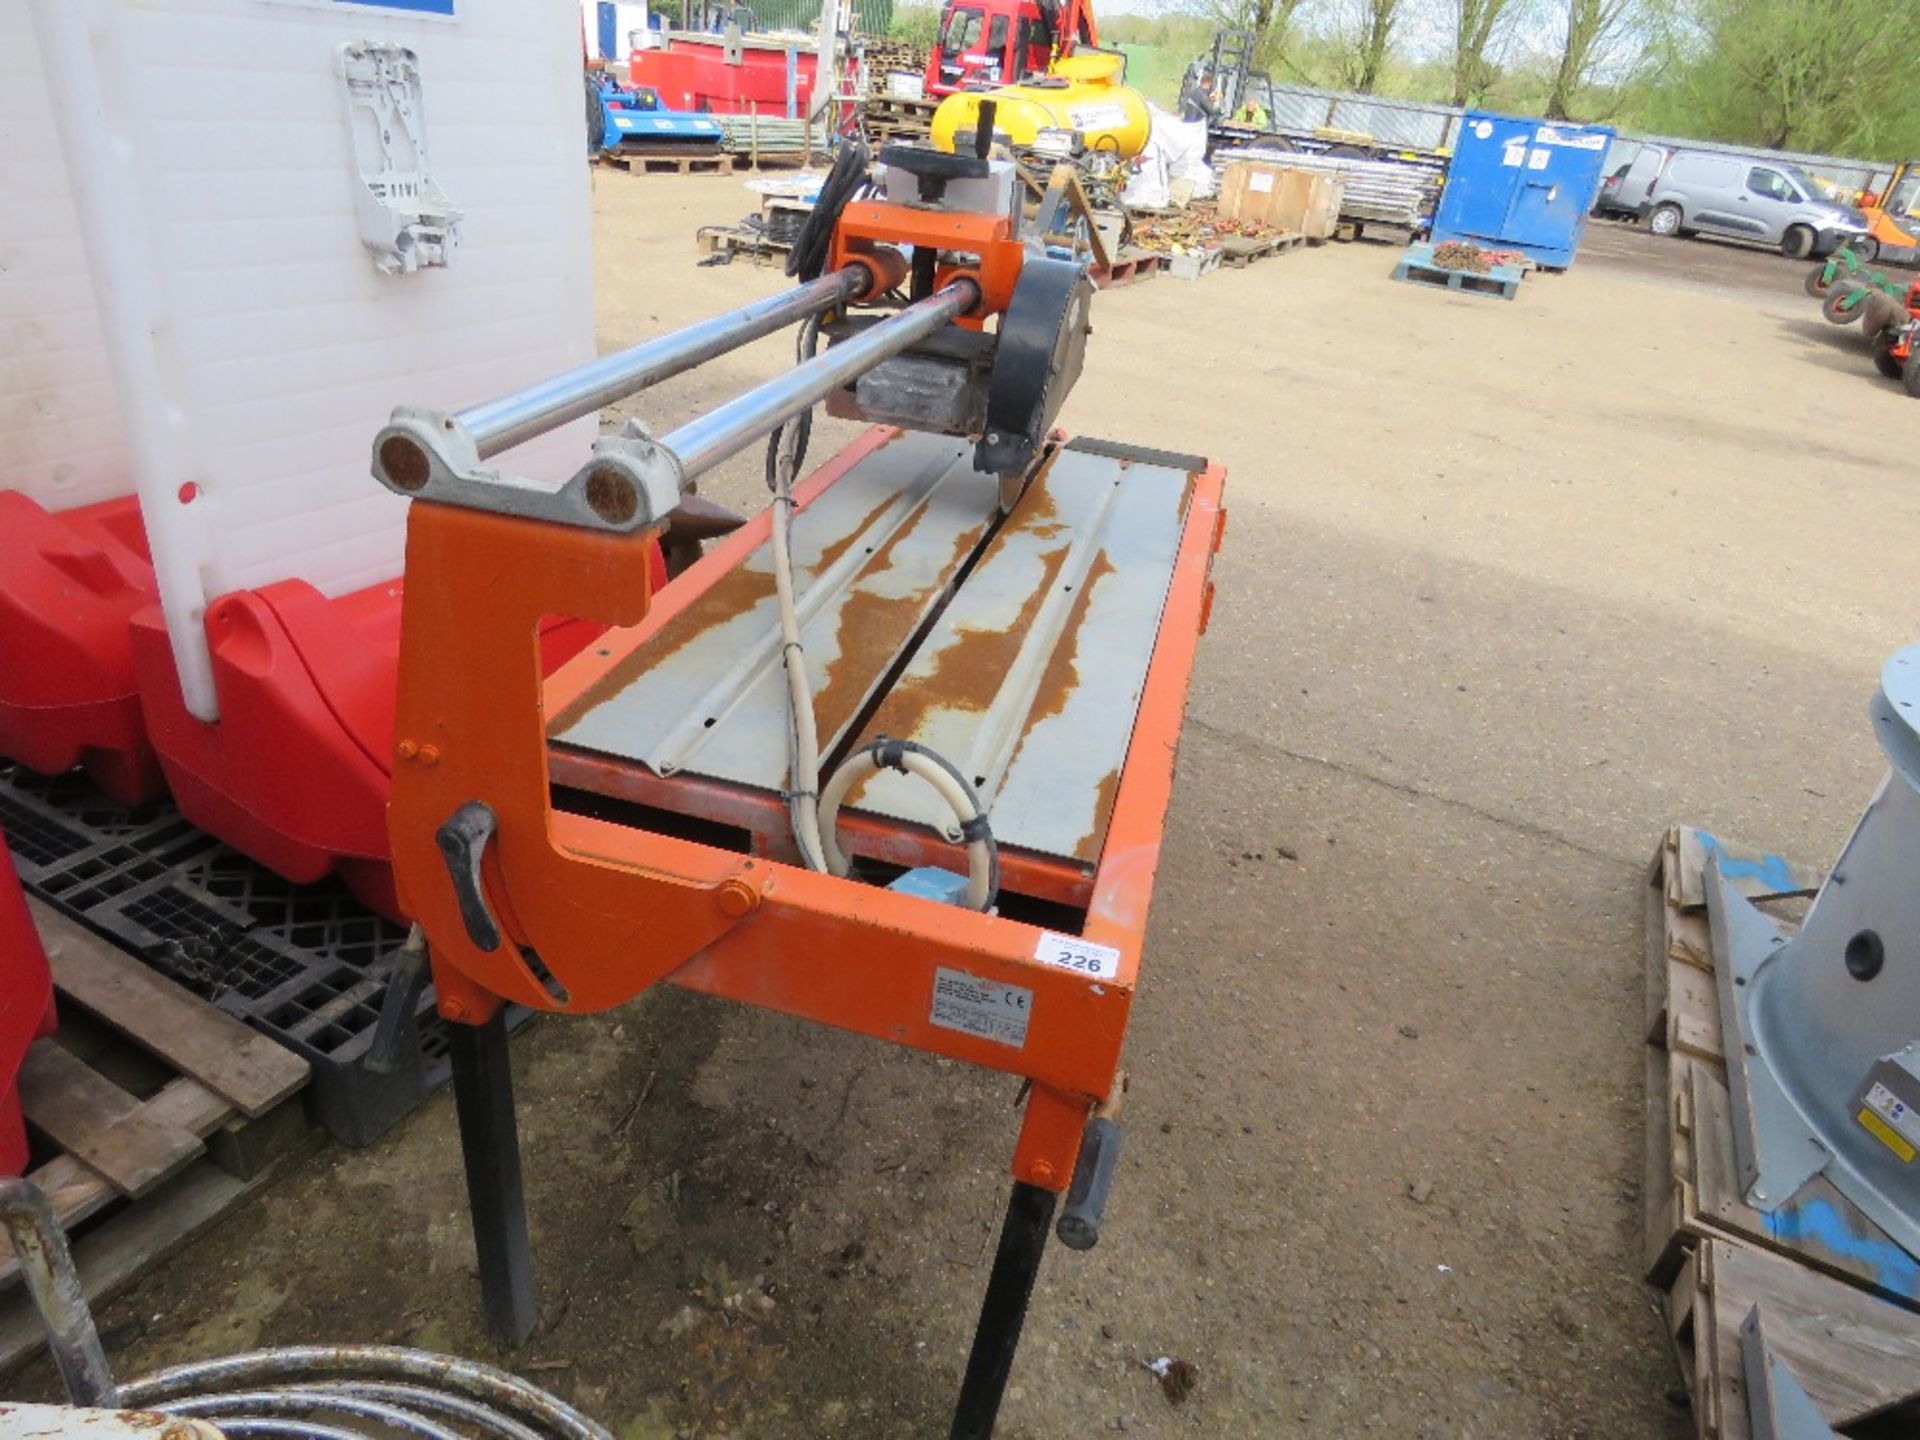 REDBAND SEGA MB120 MONO TILE SAW WITH SLIDING HEAD. RECENTLY WORKING, SURPLUS TO REQUIREMENTS. - Image 3 of 5